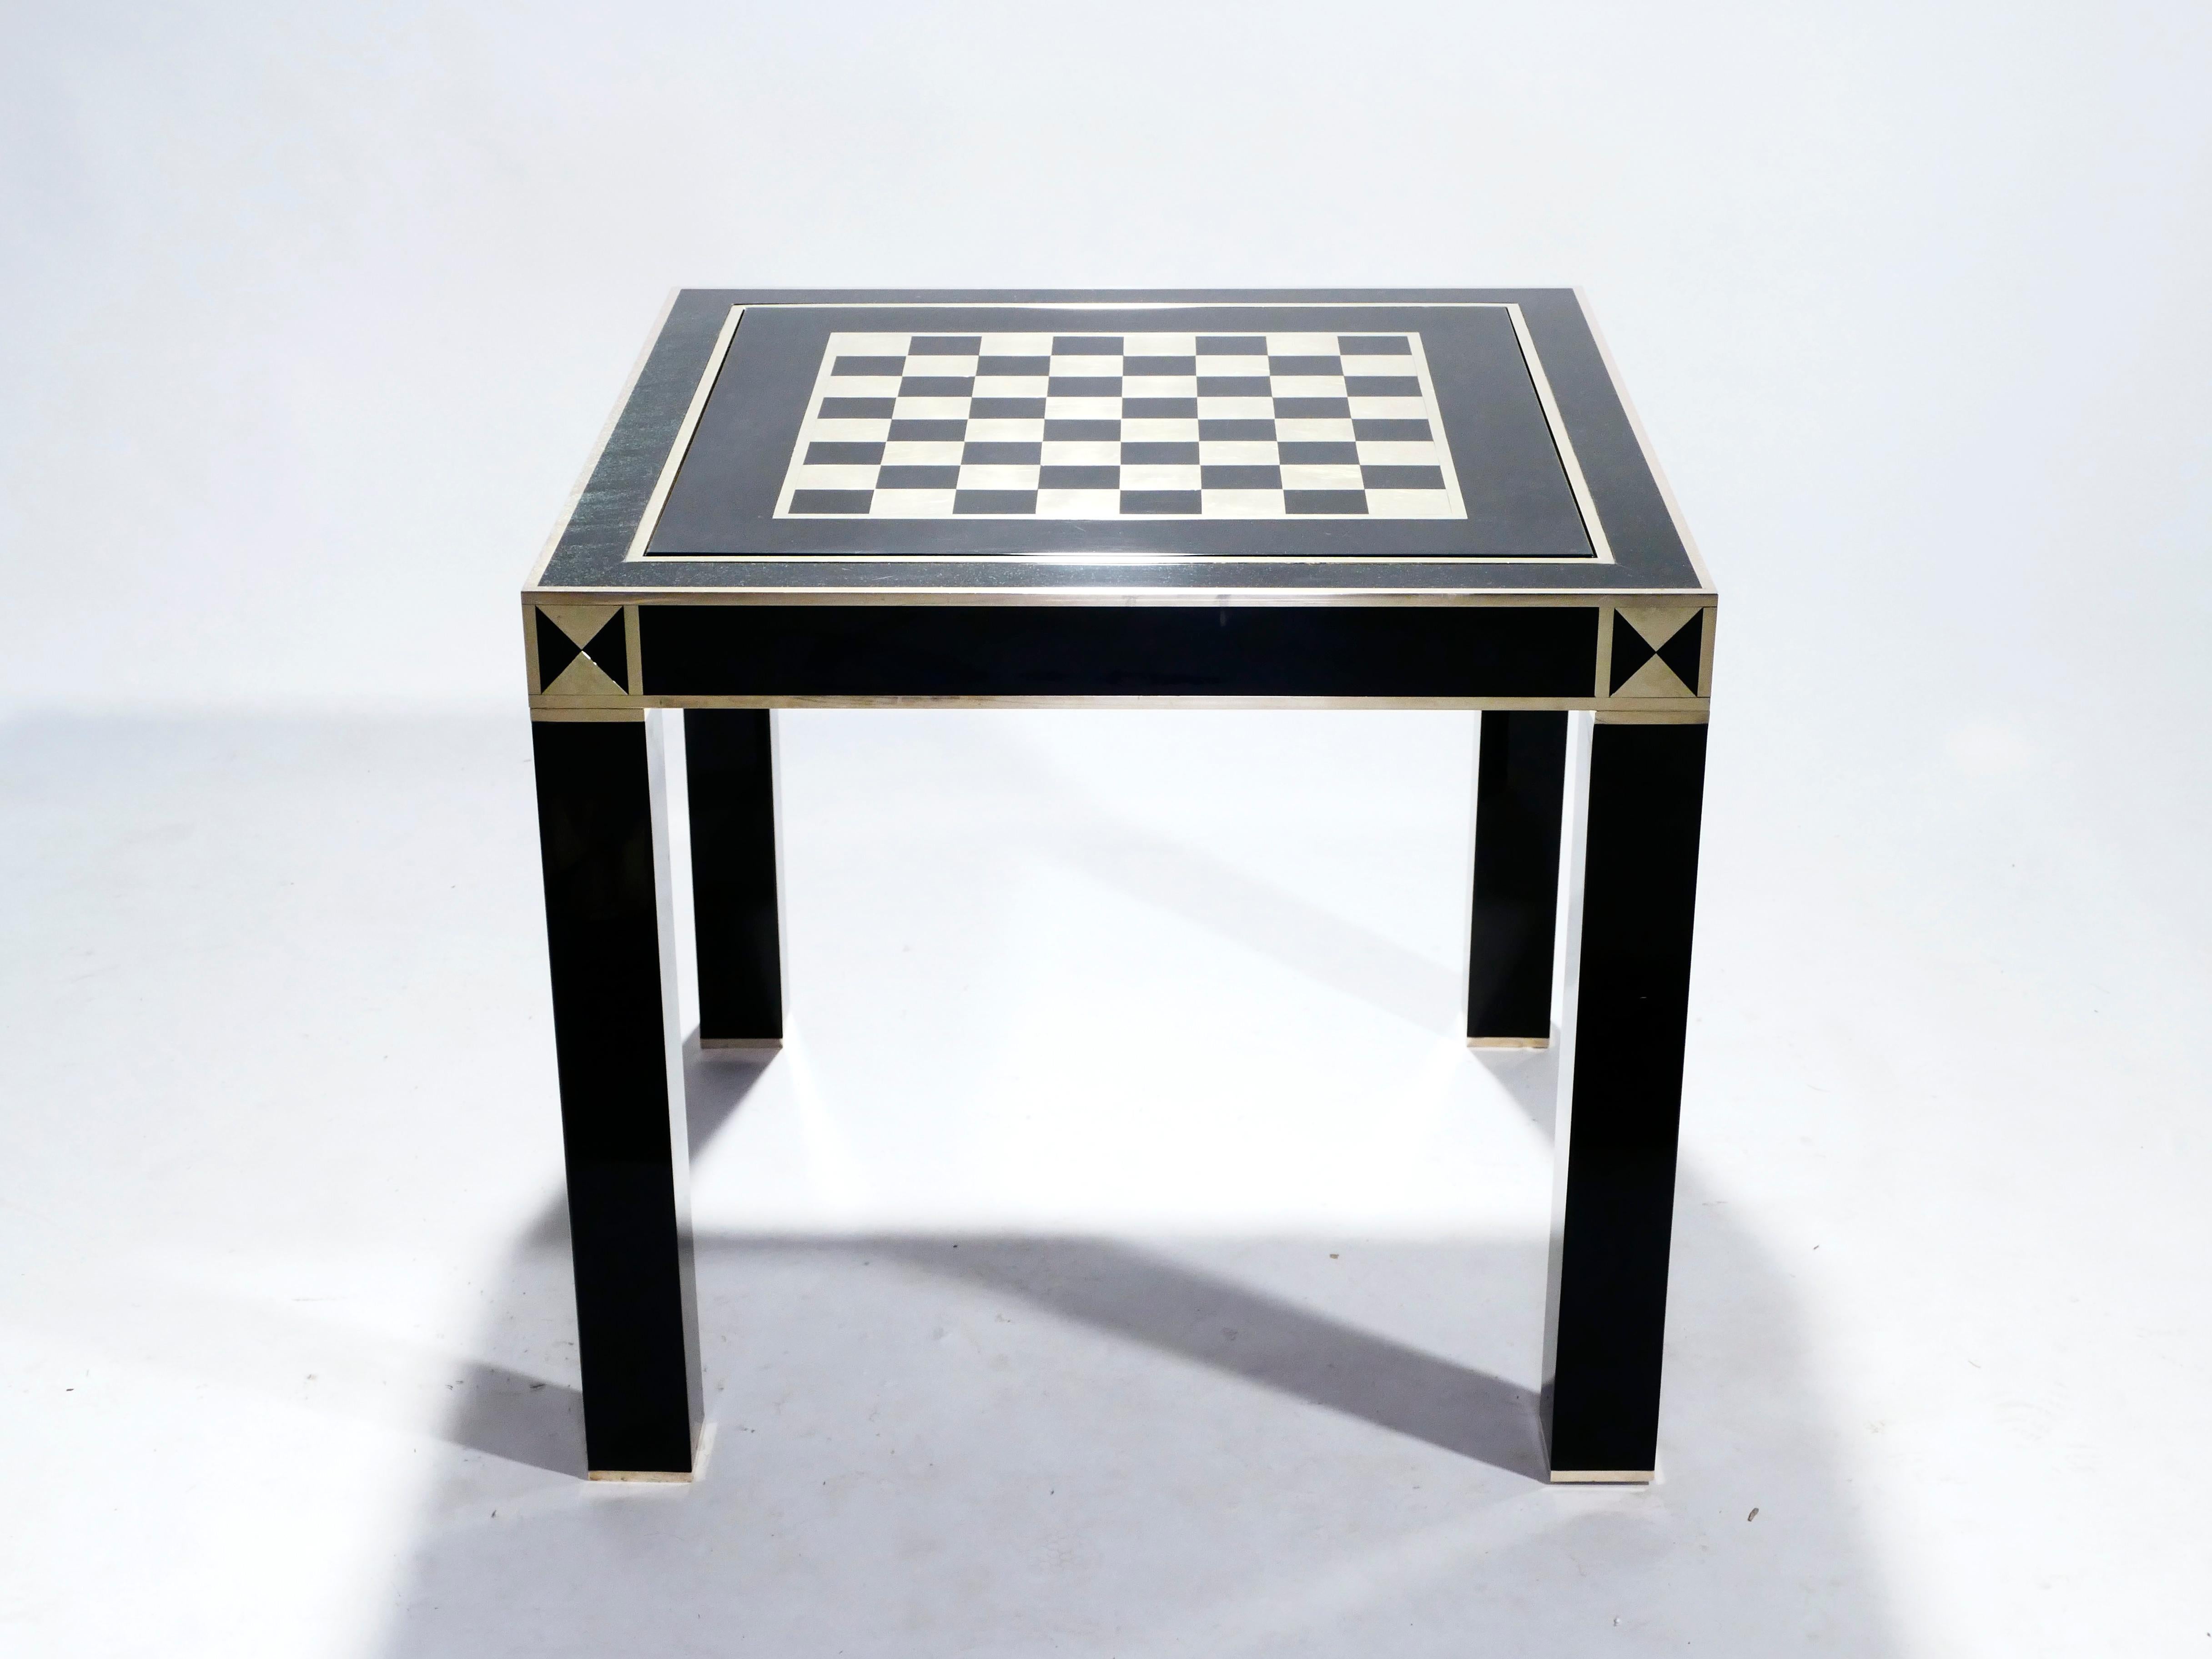 A rare game table by Jean Claude Mahey, it has a double-sided surface (green felt and a brass–lacquer checkerboard) which removes to reveal a backgammon playing surface. With its sophisticated black lacquer and shiny brass accents, the table is